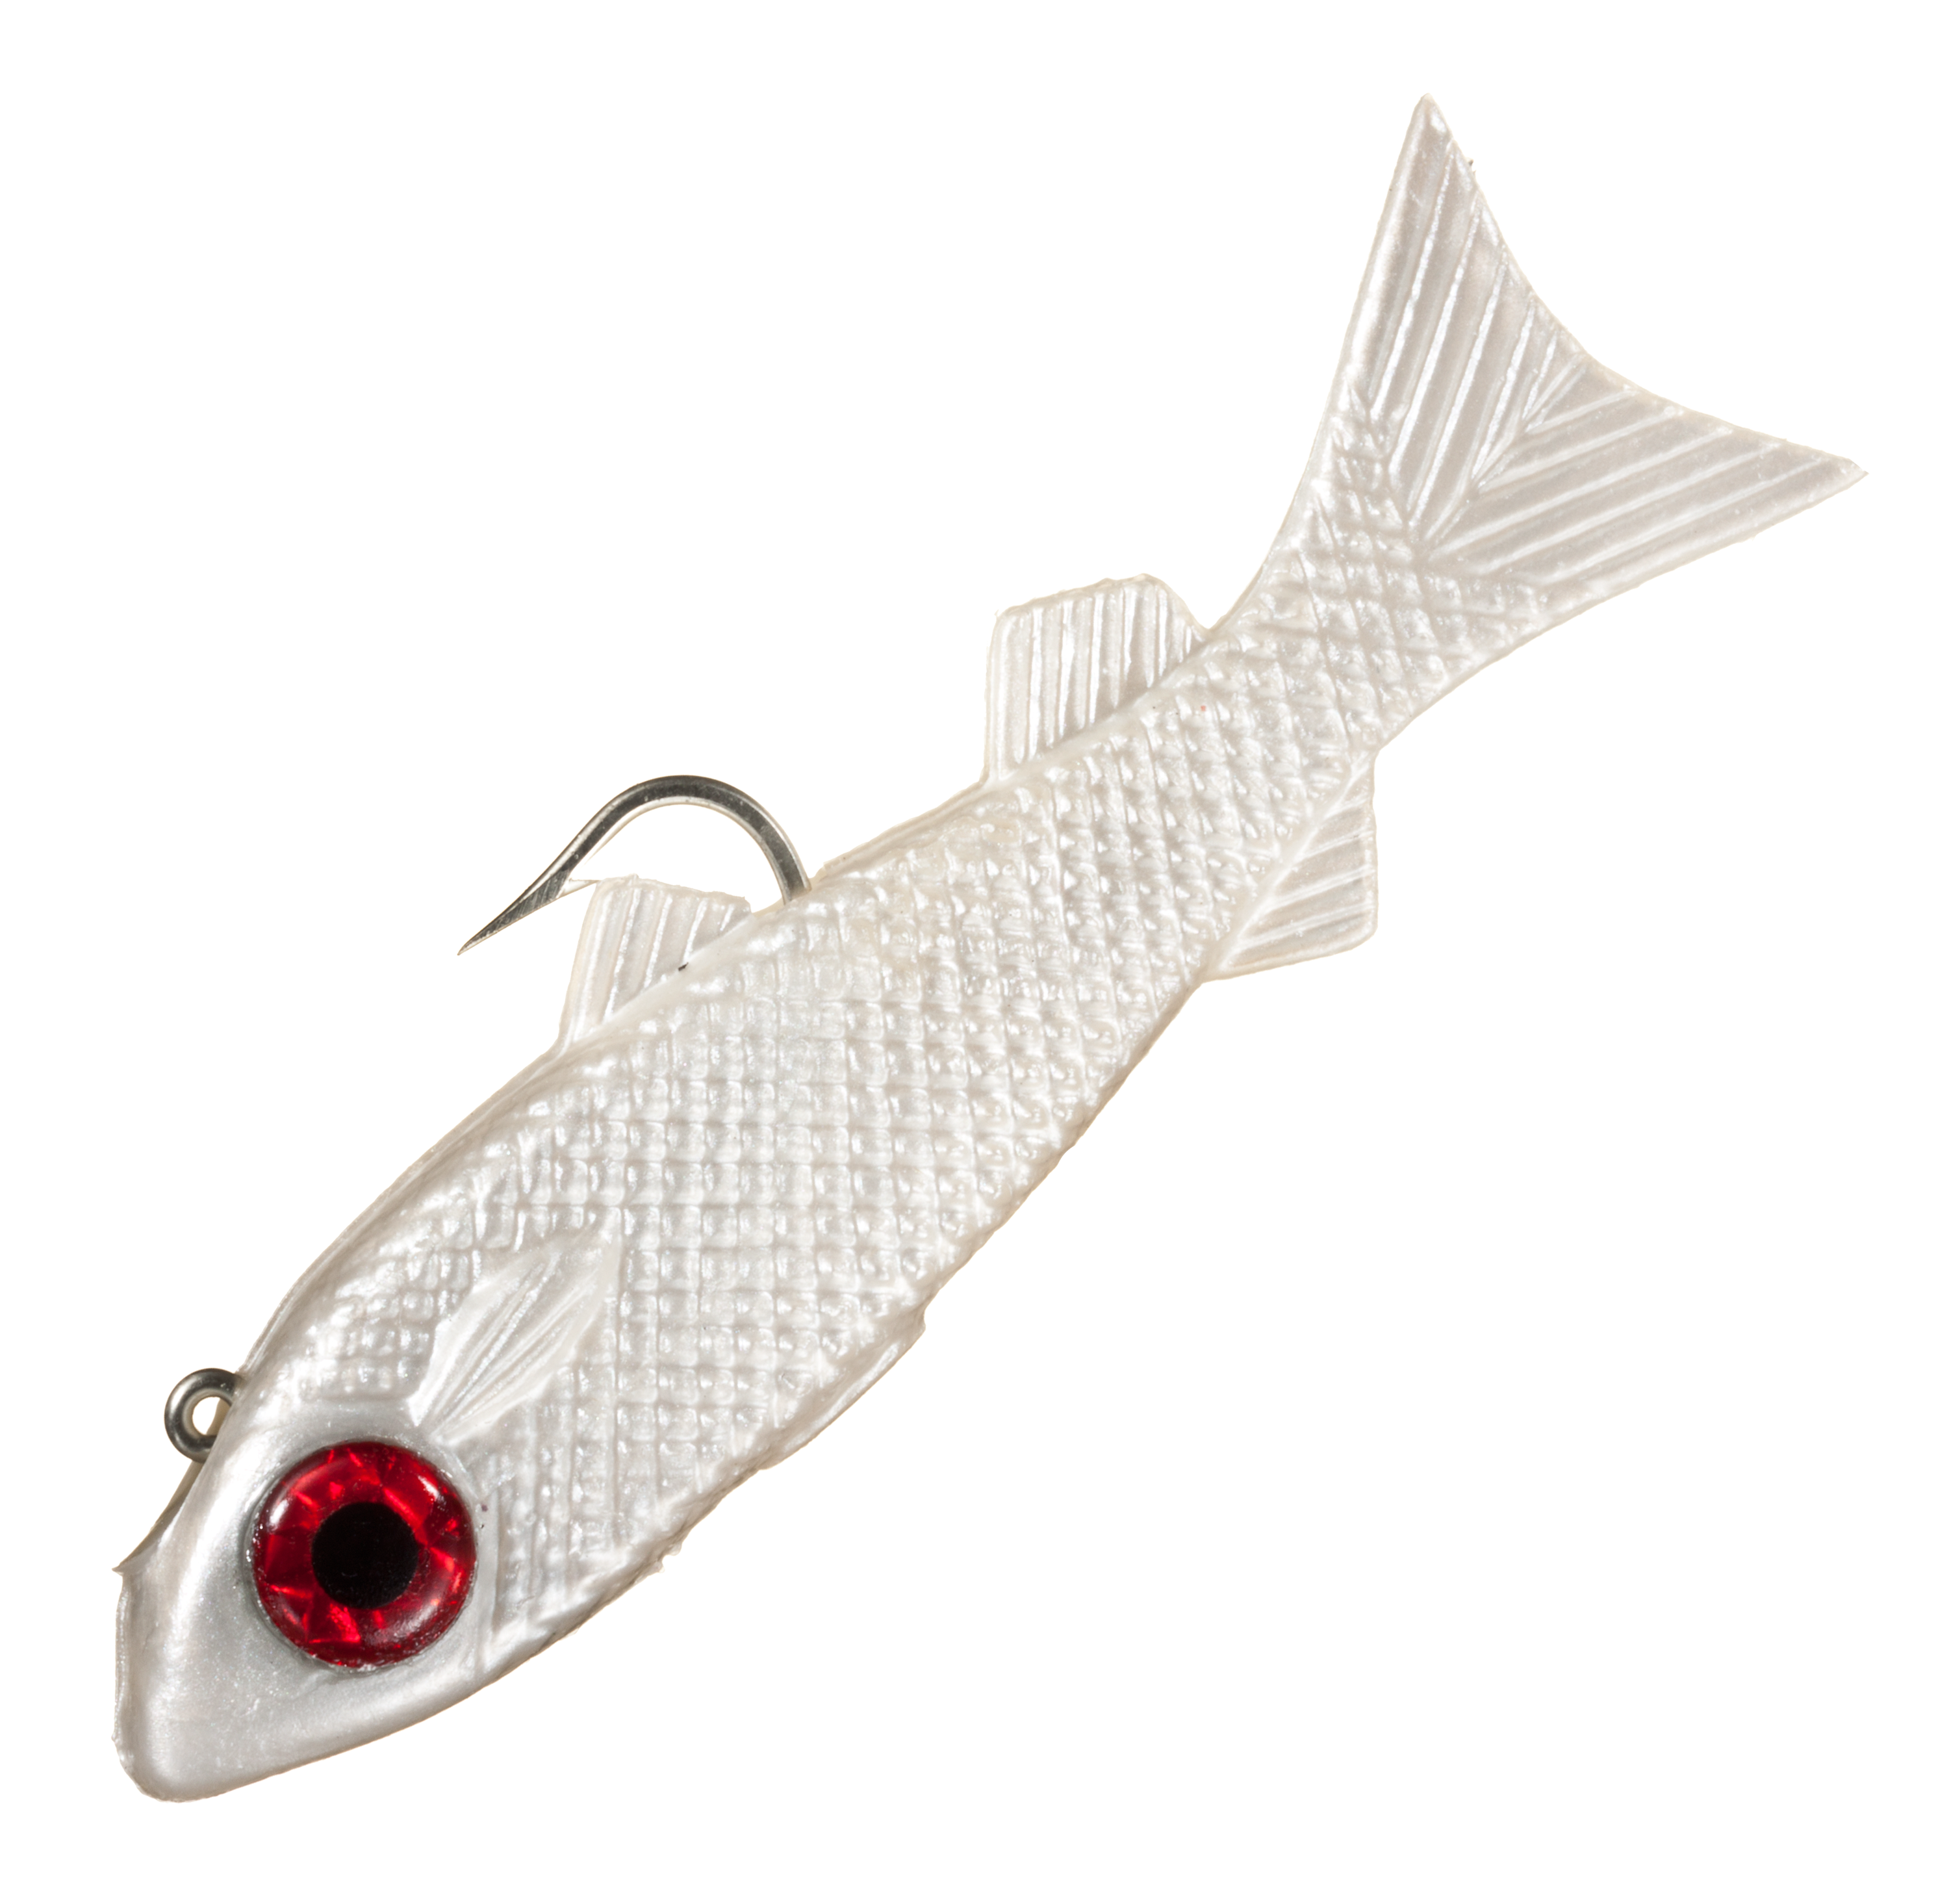 D.O.A. Bait Buster Trolling Lure